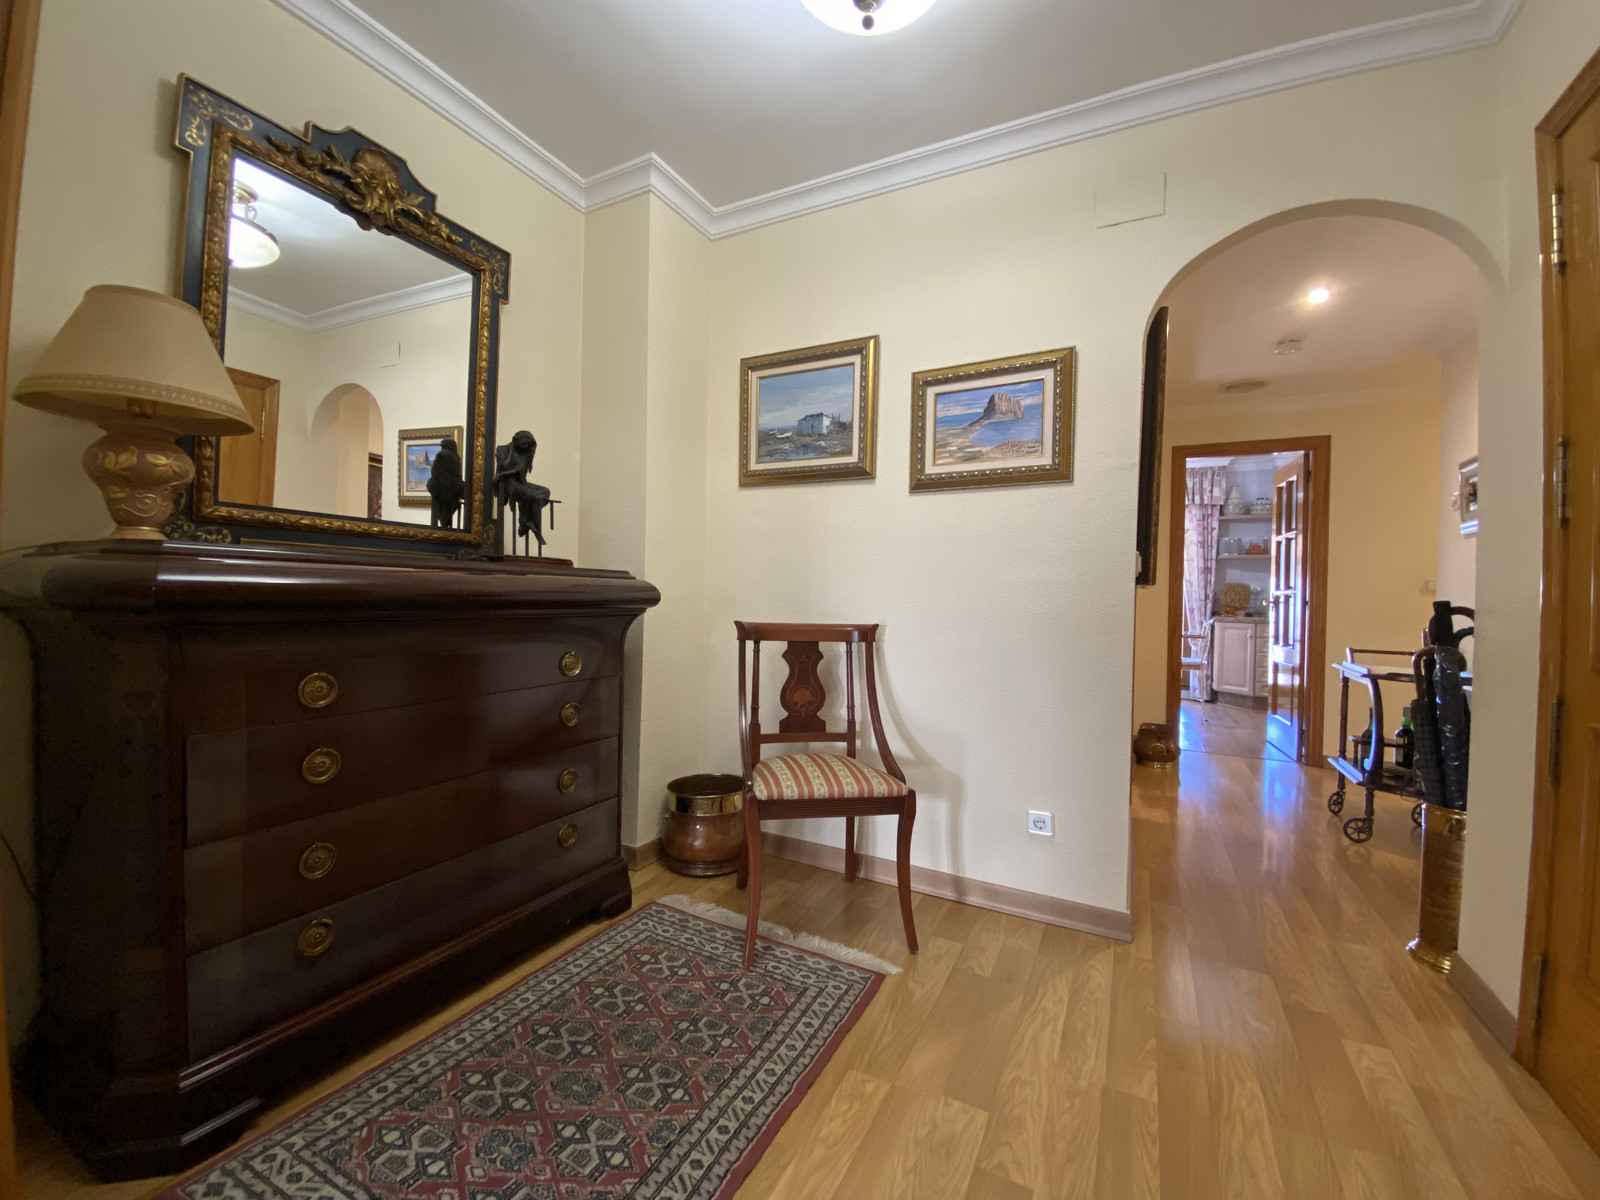 Centrally located apartment with 5 bedrooms.